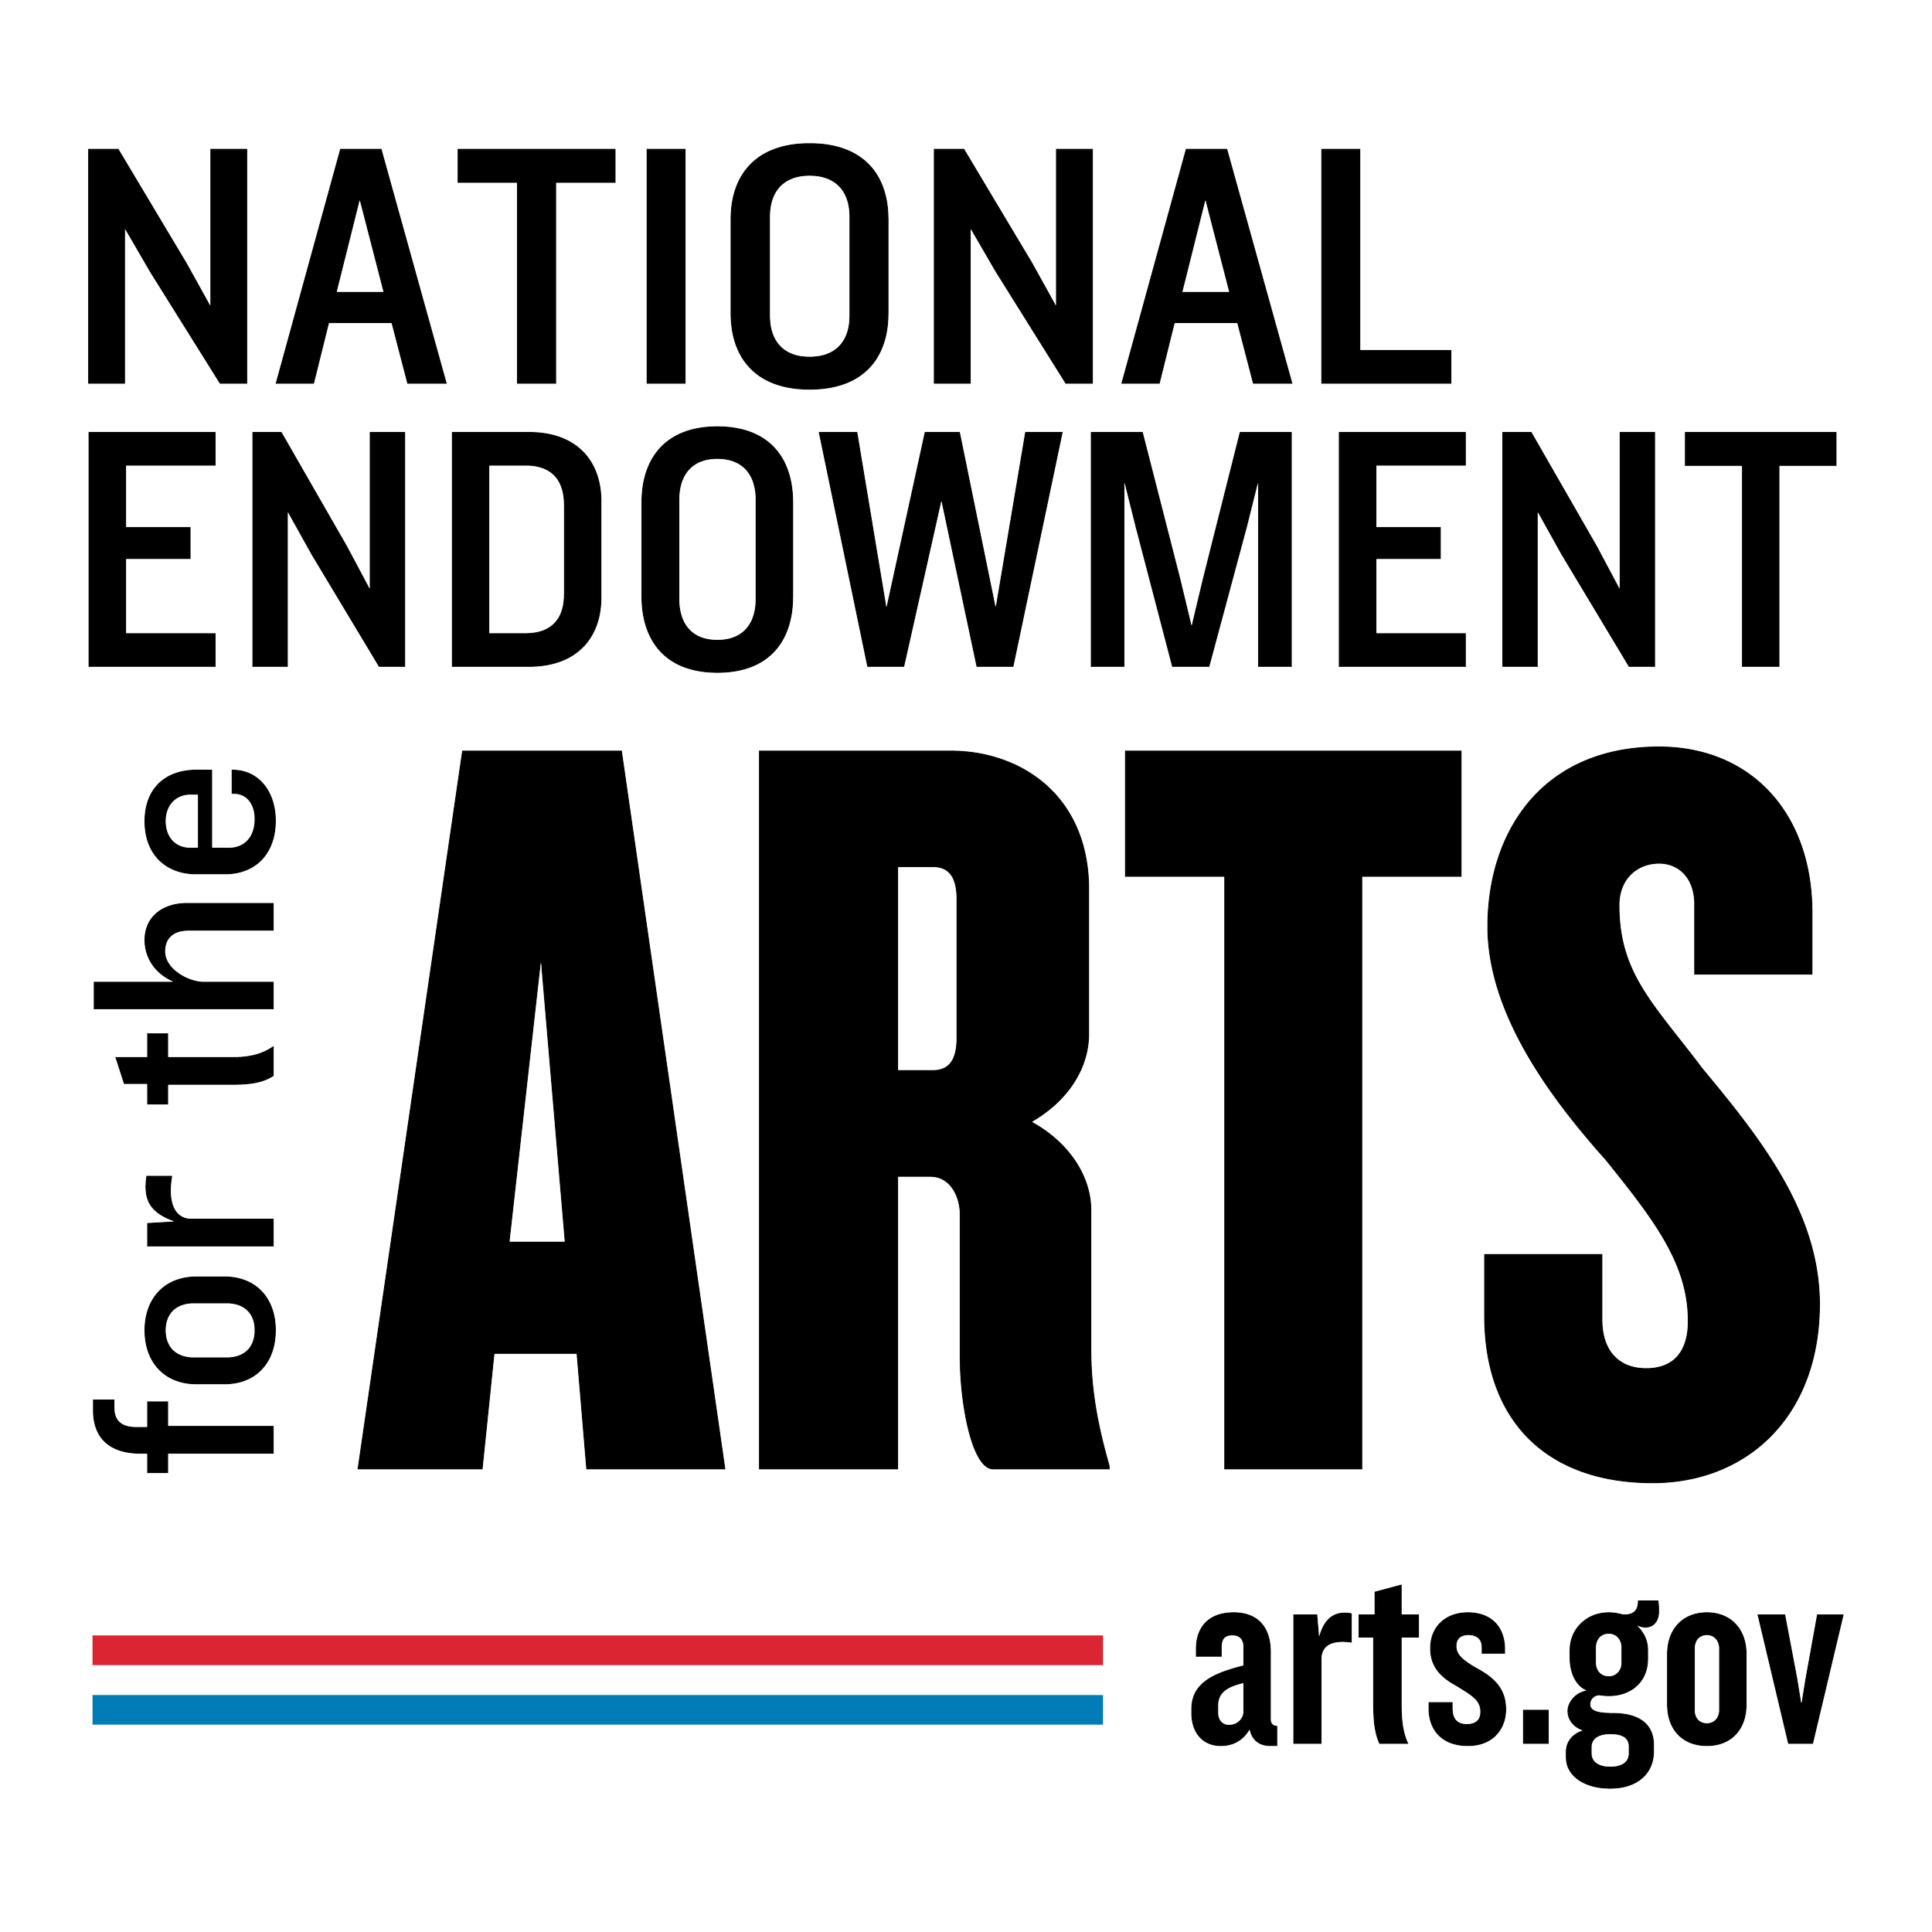 National-endowment-for-the-arts-logo.png